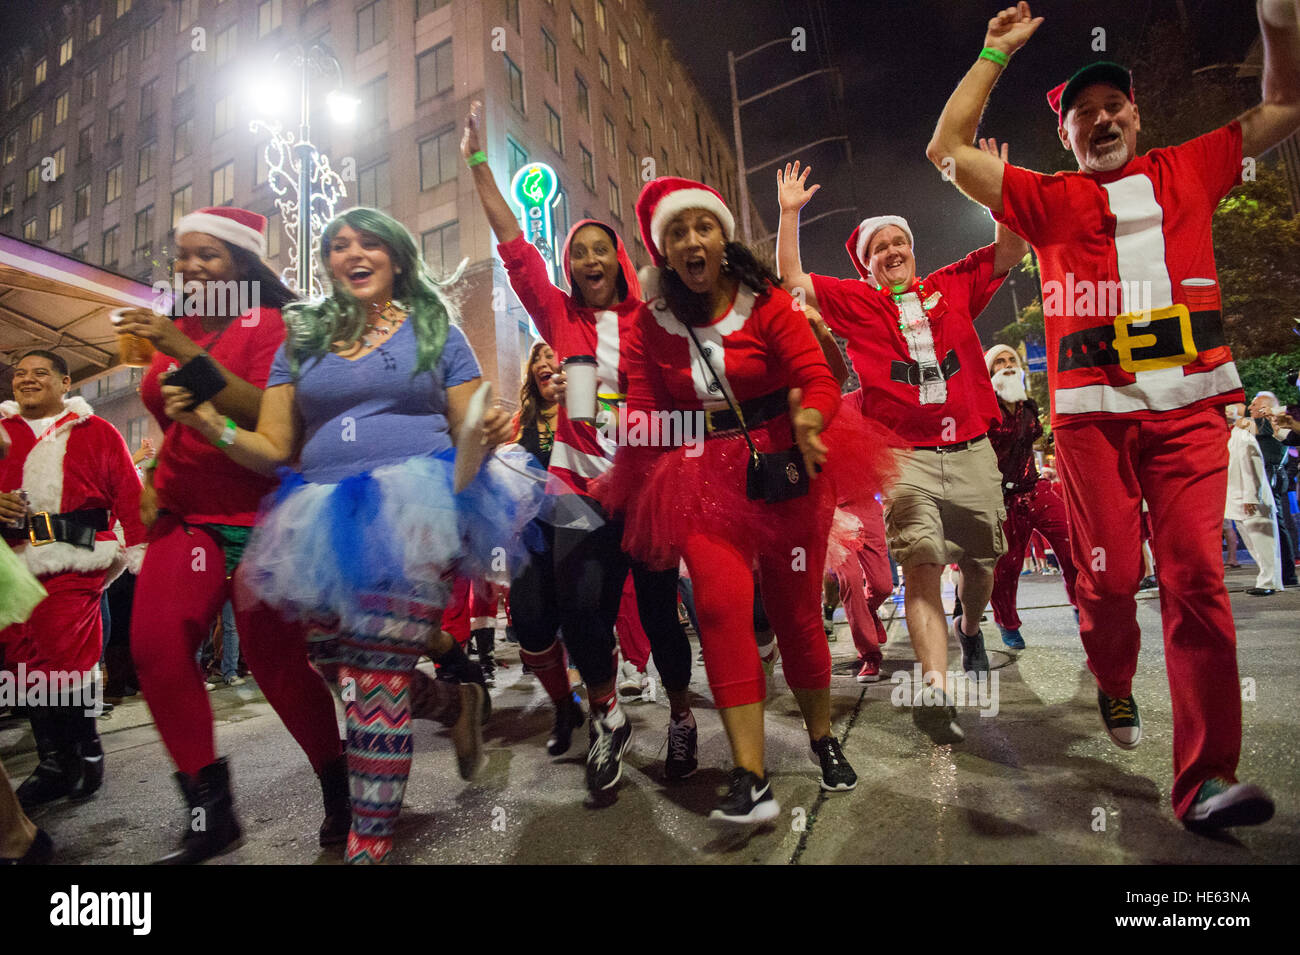 New Orleans, USA. 17th Dec, 2016. Costumed Santas'  break the start line during the 6th Annual Running of the Santas festival in New Orleans, La. on Saturday, Dec. 17, 2016. The Running of the Santas is now a national, annual bar tour that started with 40 Santas in Philadelphia with the goal to raise money for local charities. Credit: JT Blatty/Alamy Live News Stock Photo